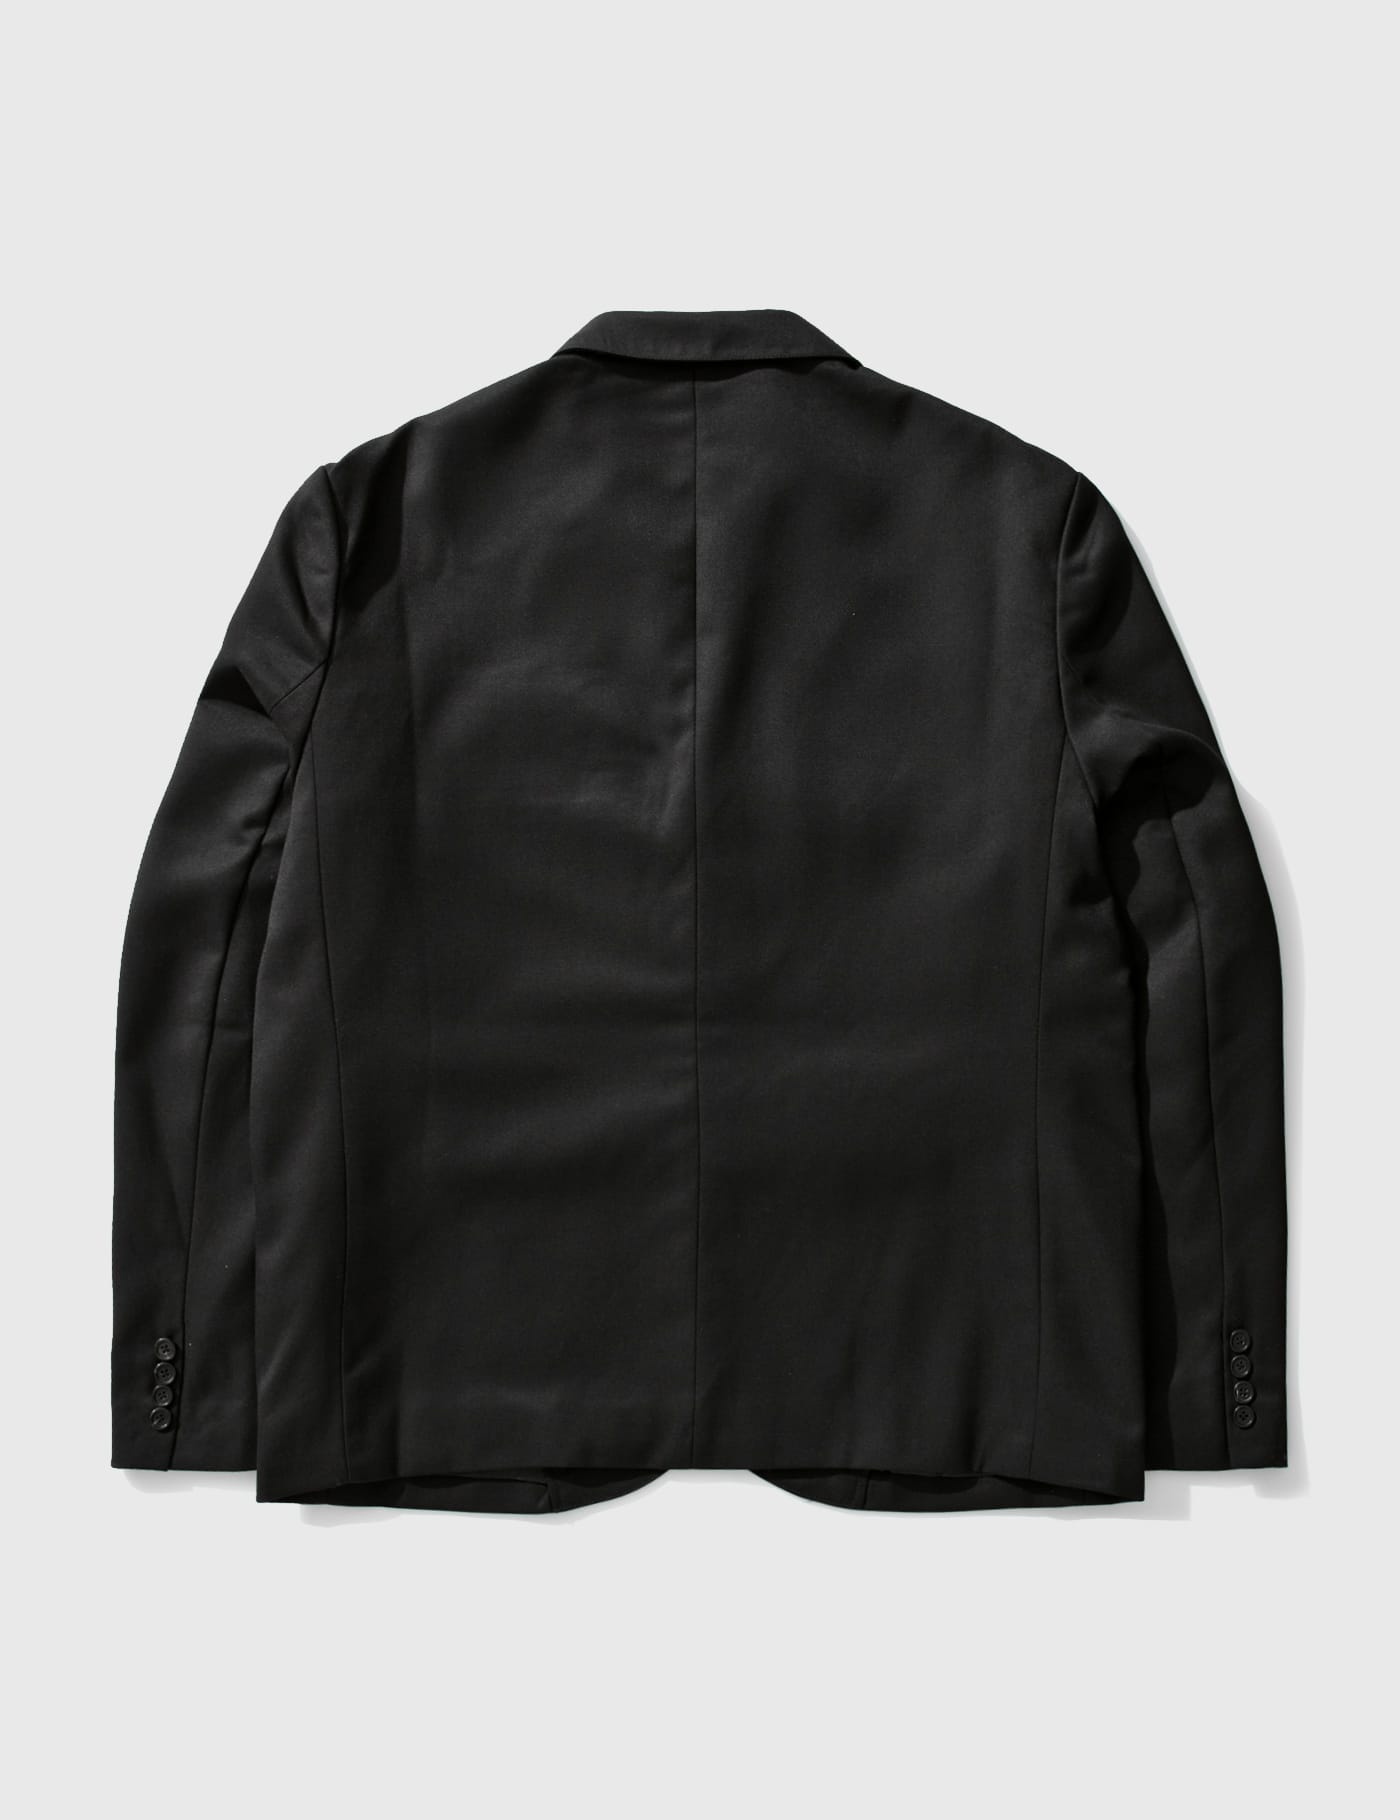 Stüssy - Sport Coat | HBX - Globally Curated Fashion and Lifestyle ...